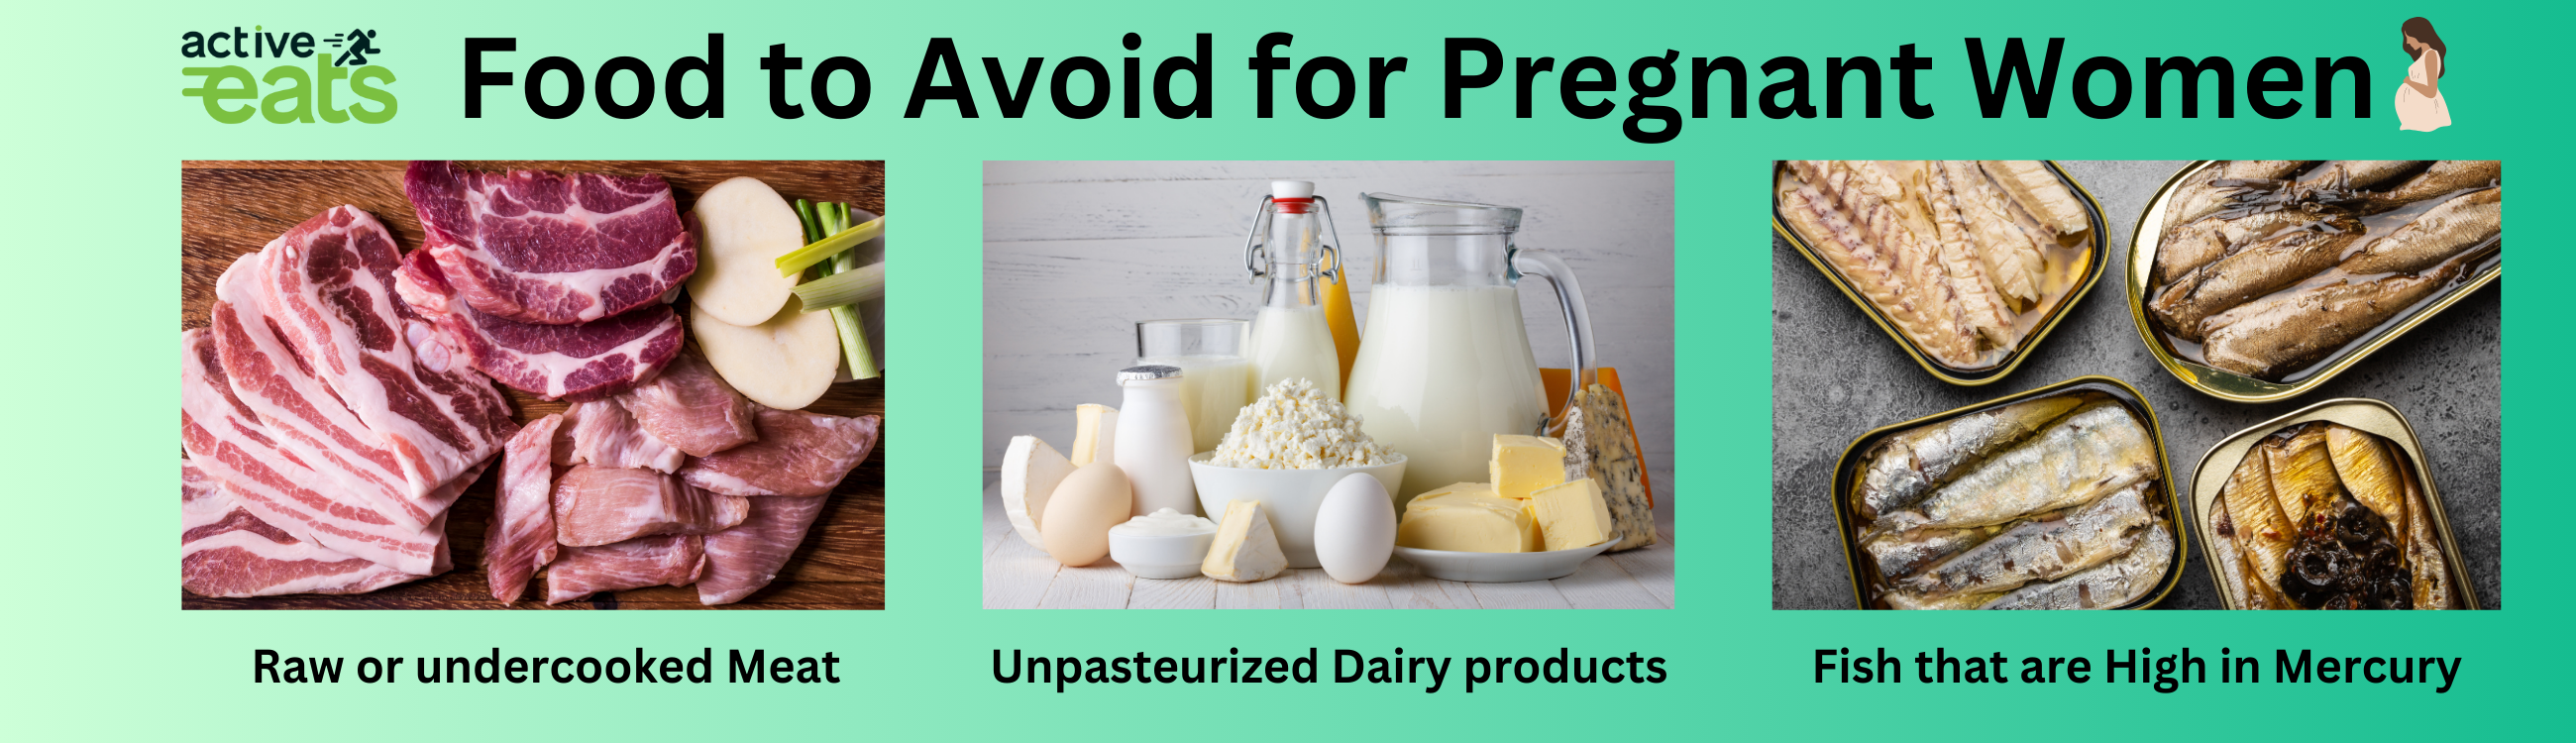 image shows the food items to avoid for pregnant women like raw or undercooked meat picture, unpasteurized dairy products and fish that are high in mercury picture.